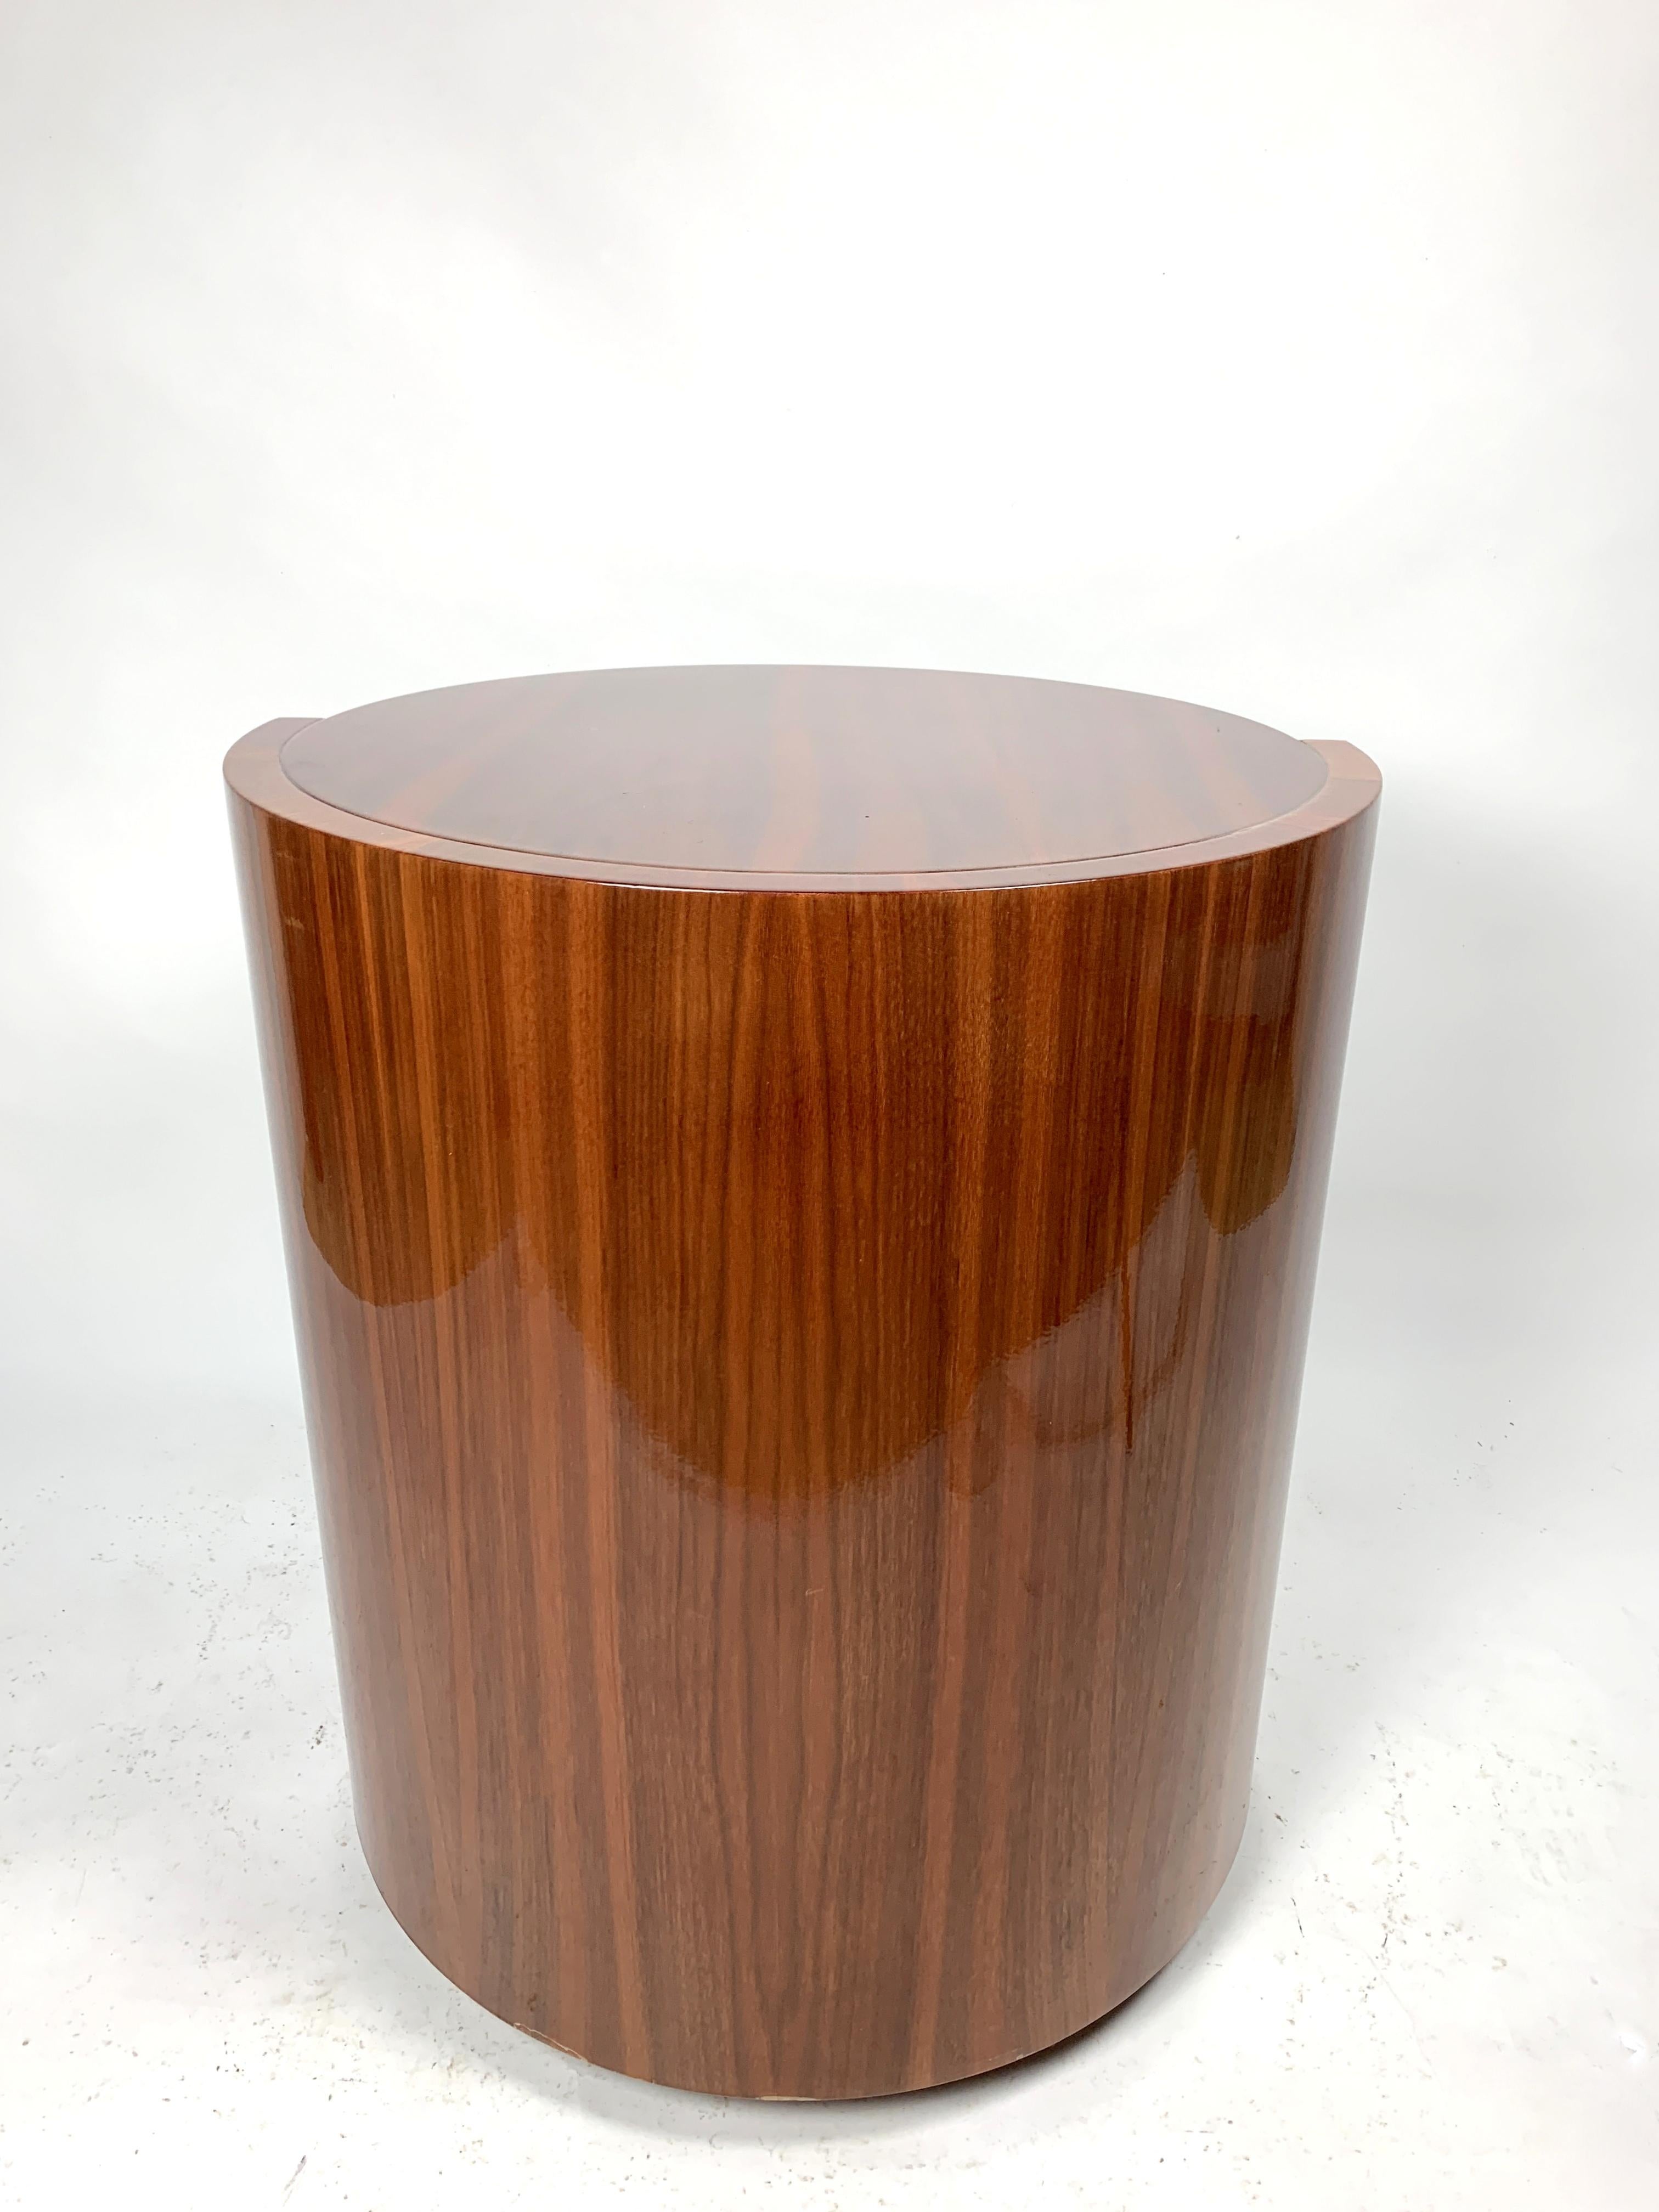 Mid-20th Century Art Deco Side Table with Walnut Veneer and Chrome-Plated Steel